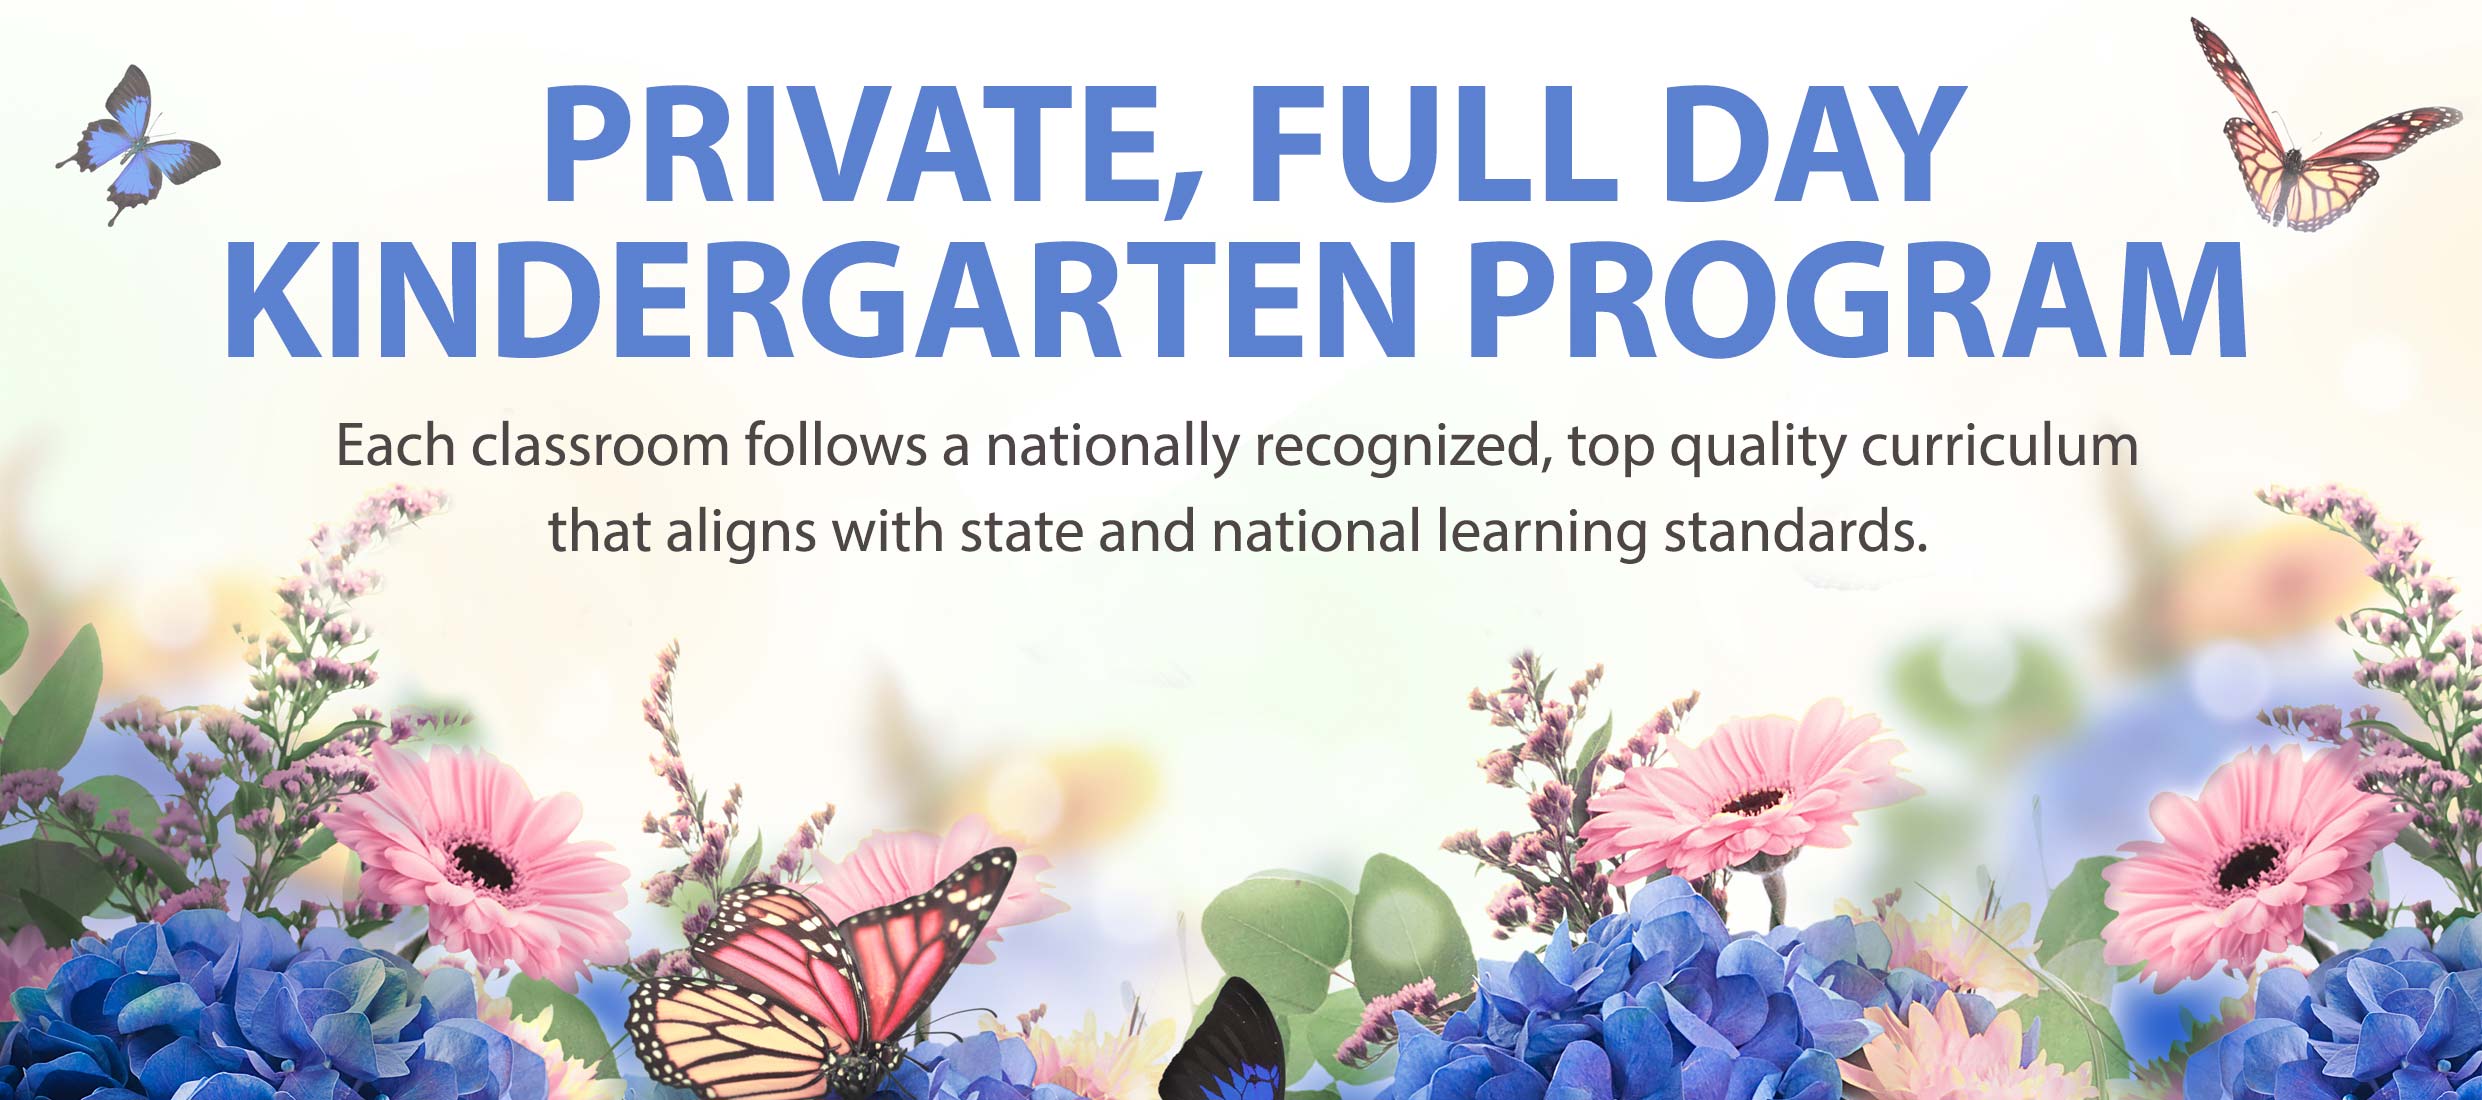 PRIVATE, FULL DAY KINDERGARTENG PROGRAM : Each classroom follows a nationally recognized, top quality curriculum that aligns with state and national learning standards.